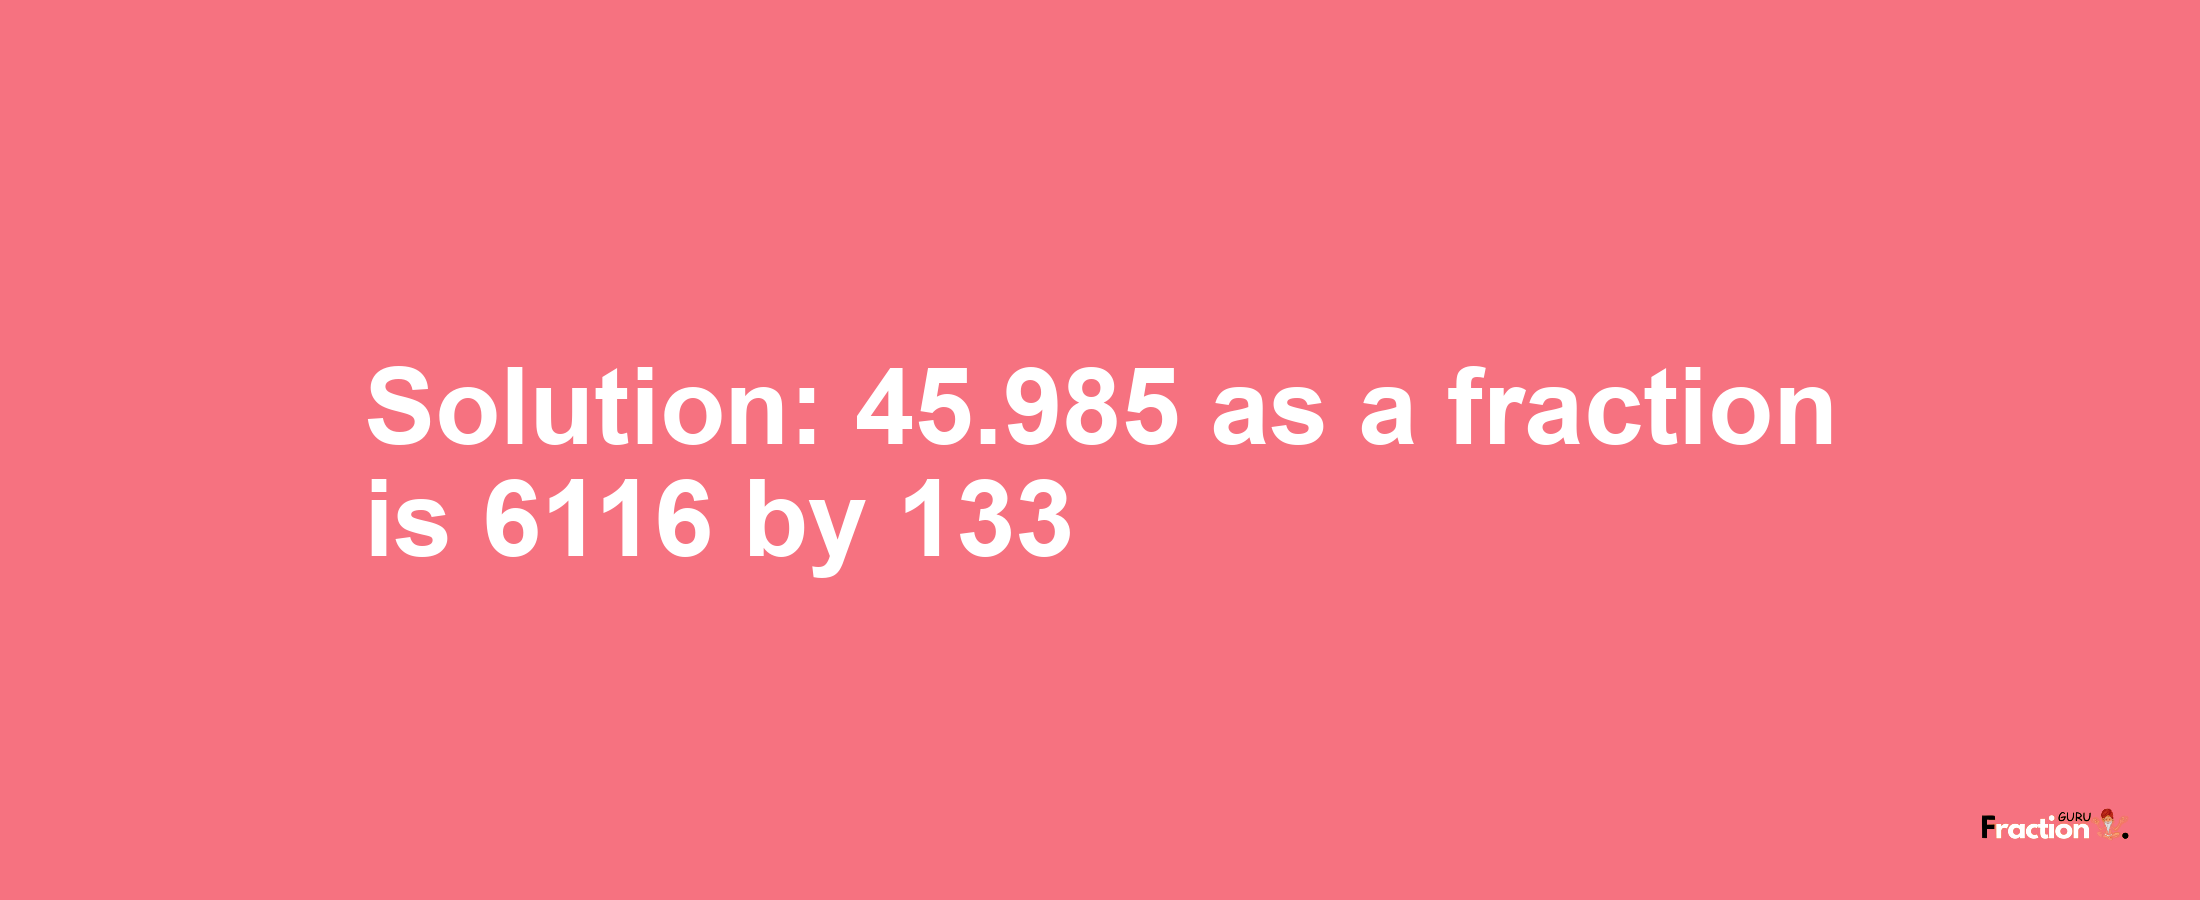 Solution:45.985 as a fraction is 6116/133